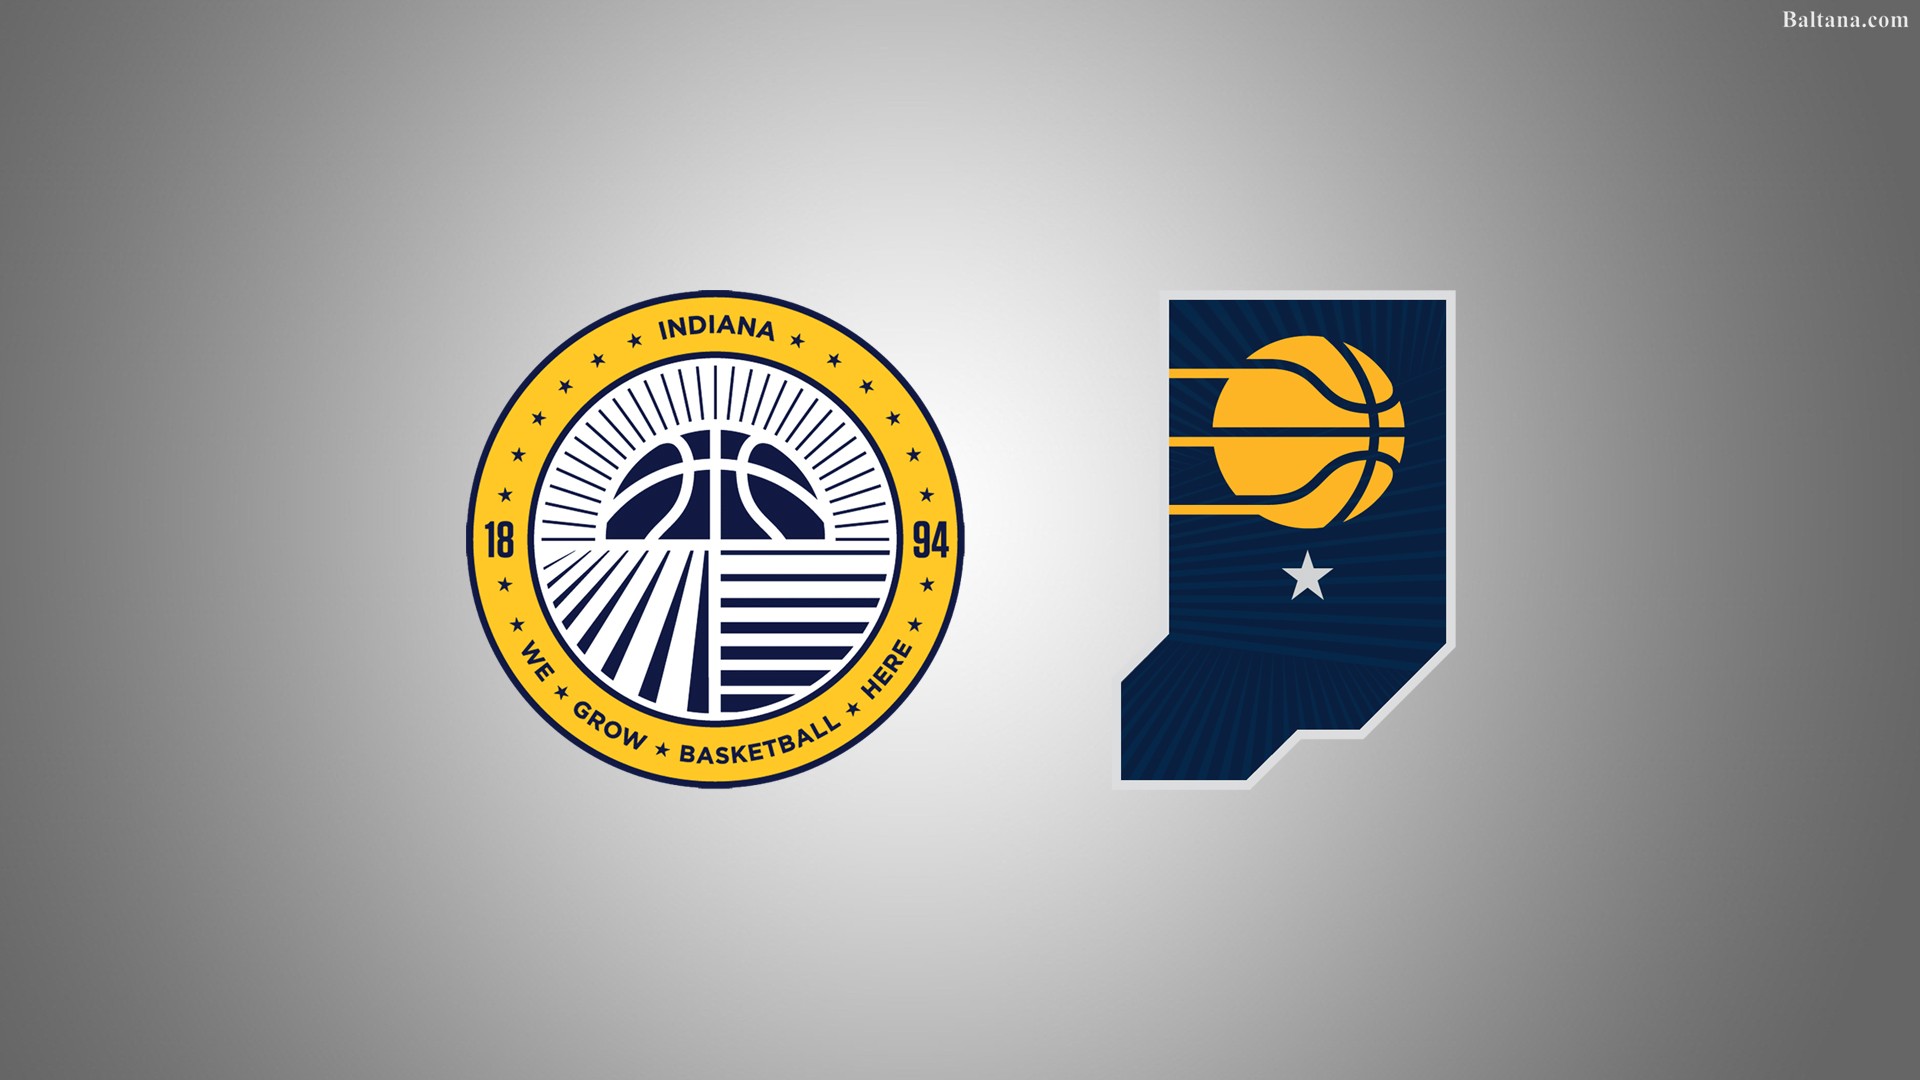 Indiana Pacers Best Wallpaper - We Grow Basketball Here - HD Wallpaper 